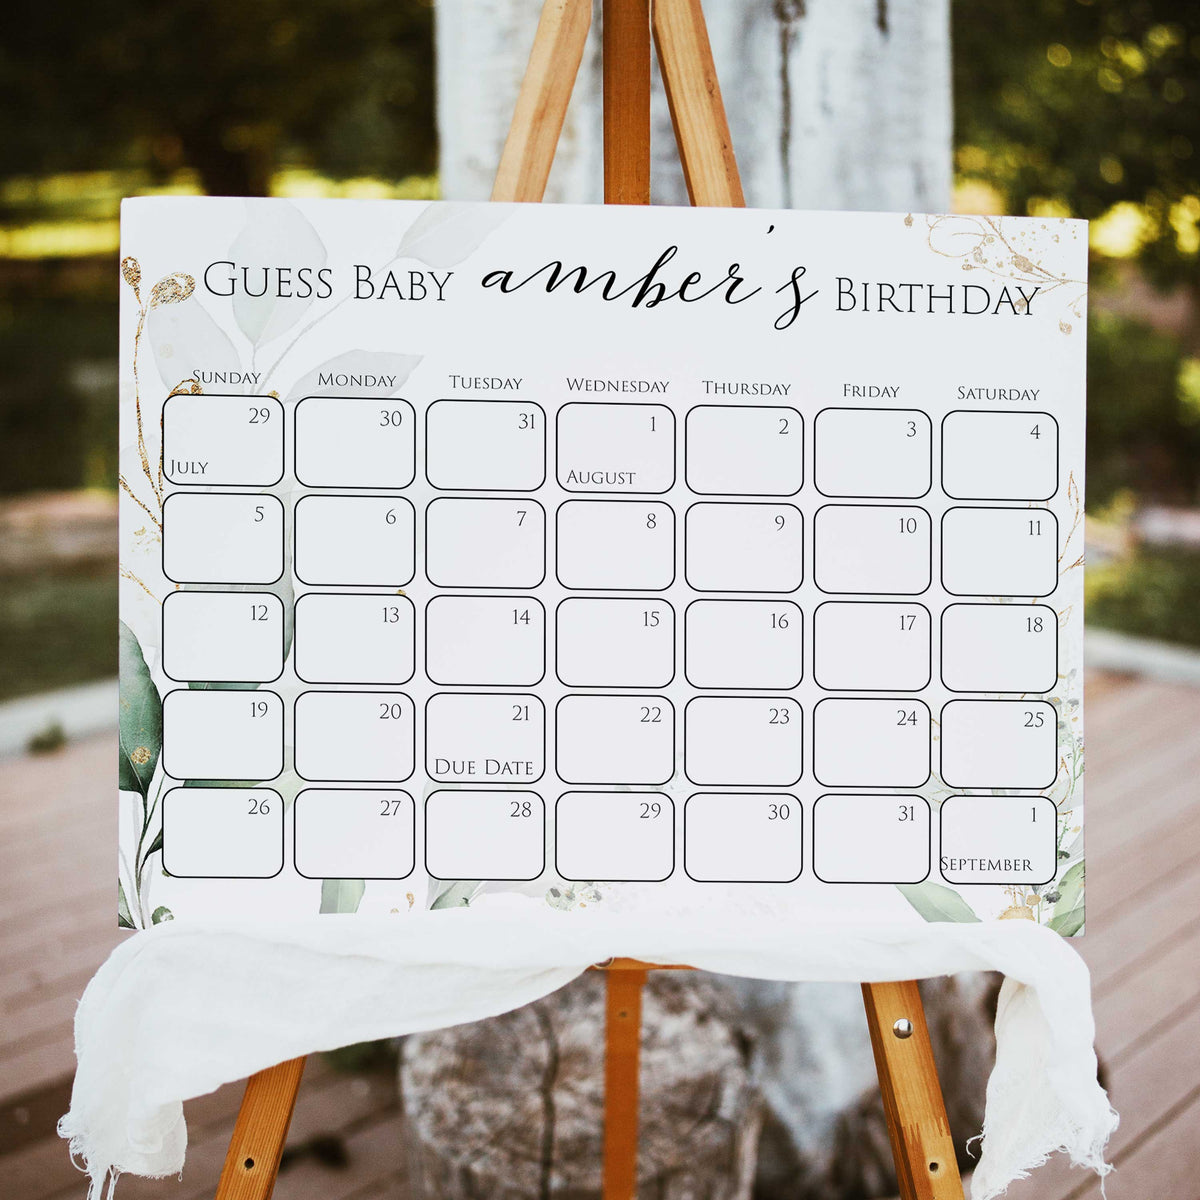 guess the baby birthday game, baby birthday predictions game, printable baby shower games, gold leaf baby games, greenery baby shower